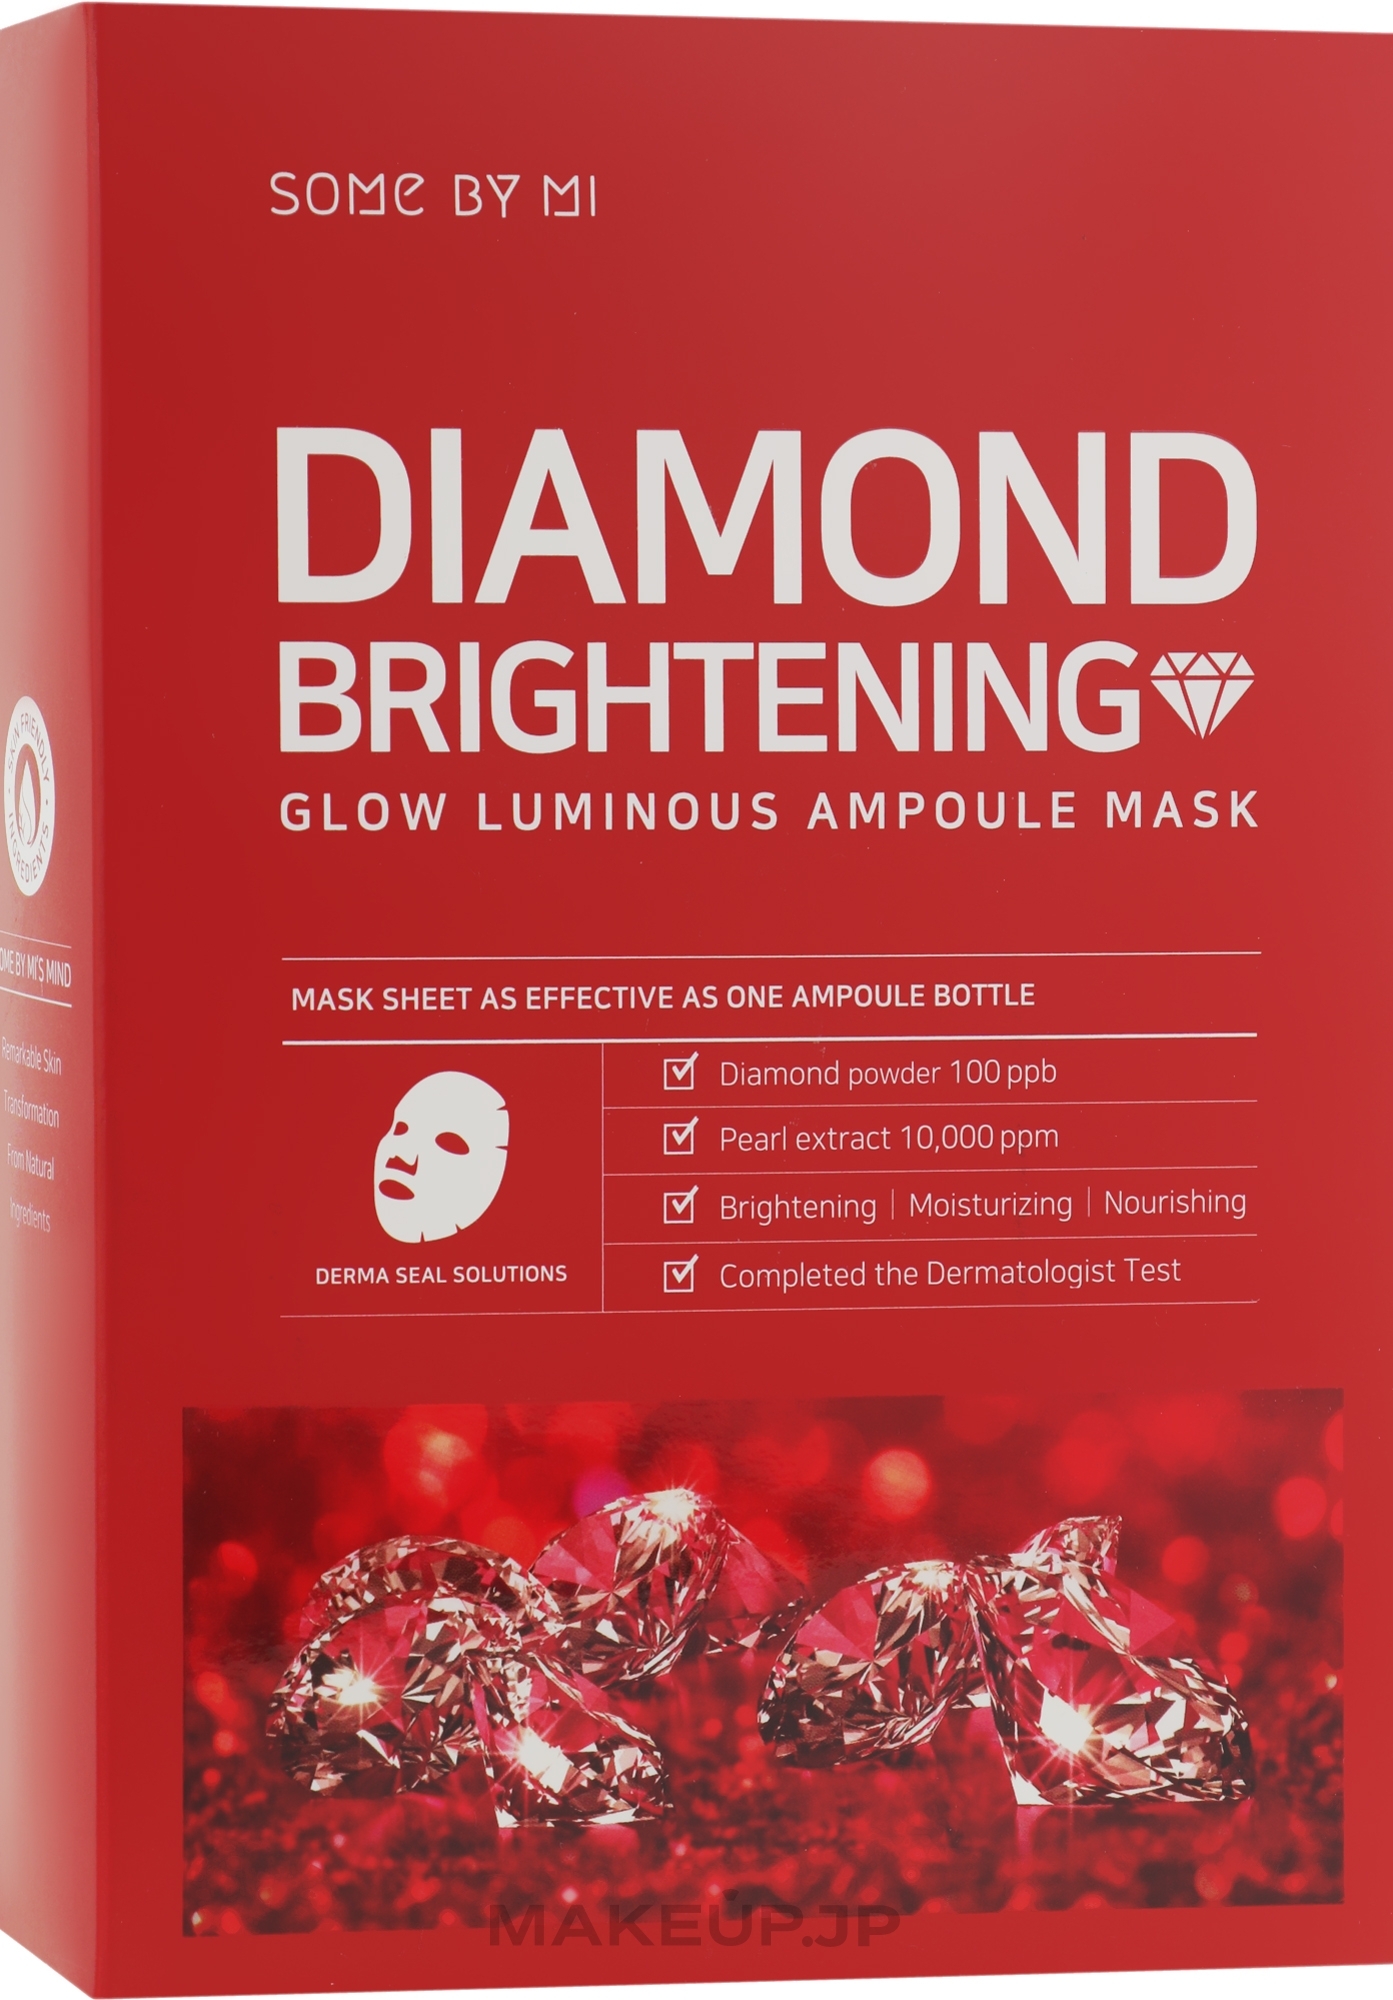 Diamond Dust Brightening Ampoule Mask - Some By Mi Diamond Brightening Calming Glow Luminous Ampoule Mask — photo 10 x 25 g